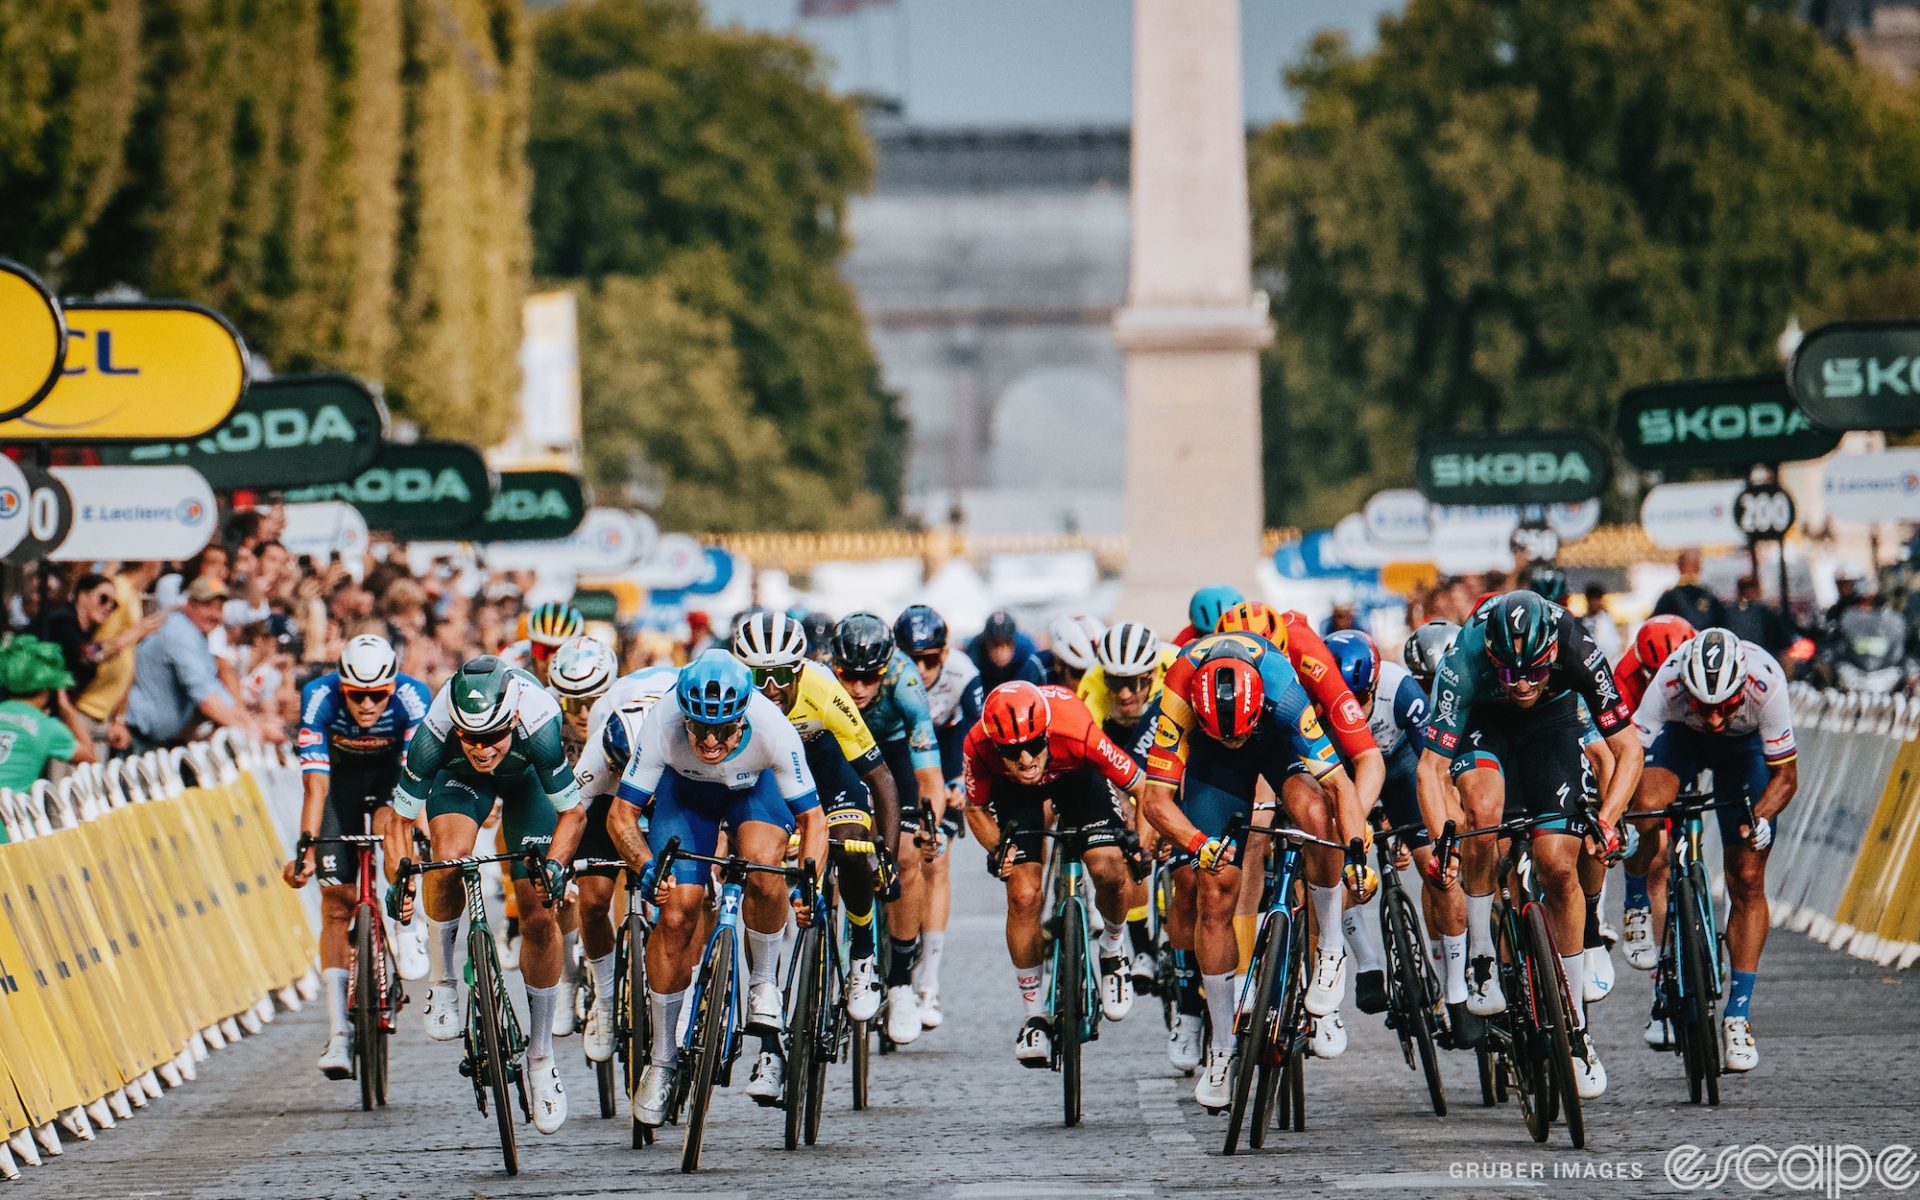 The final sprint on the Champs in 2023. Riders lean their bikes as they make a mad dash for the line. Some look forward while others have their heads bent low.